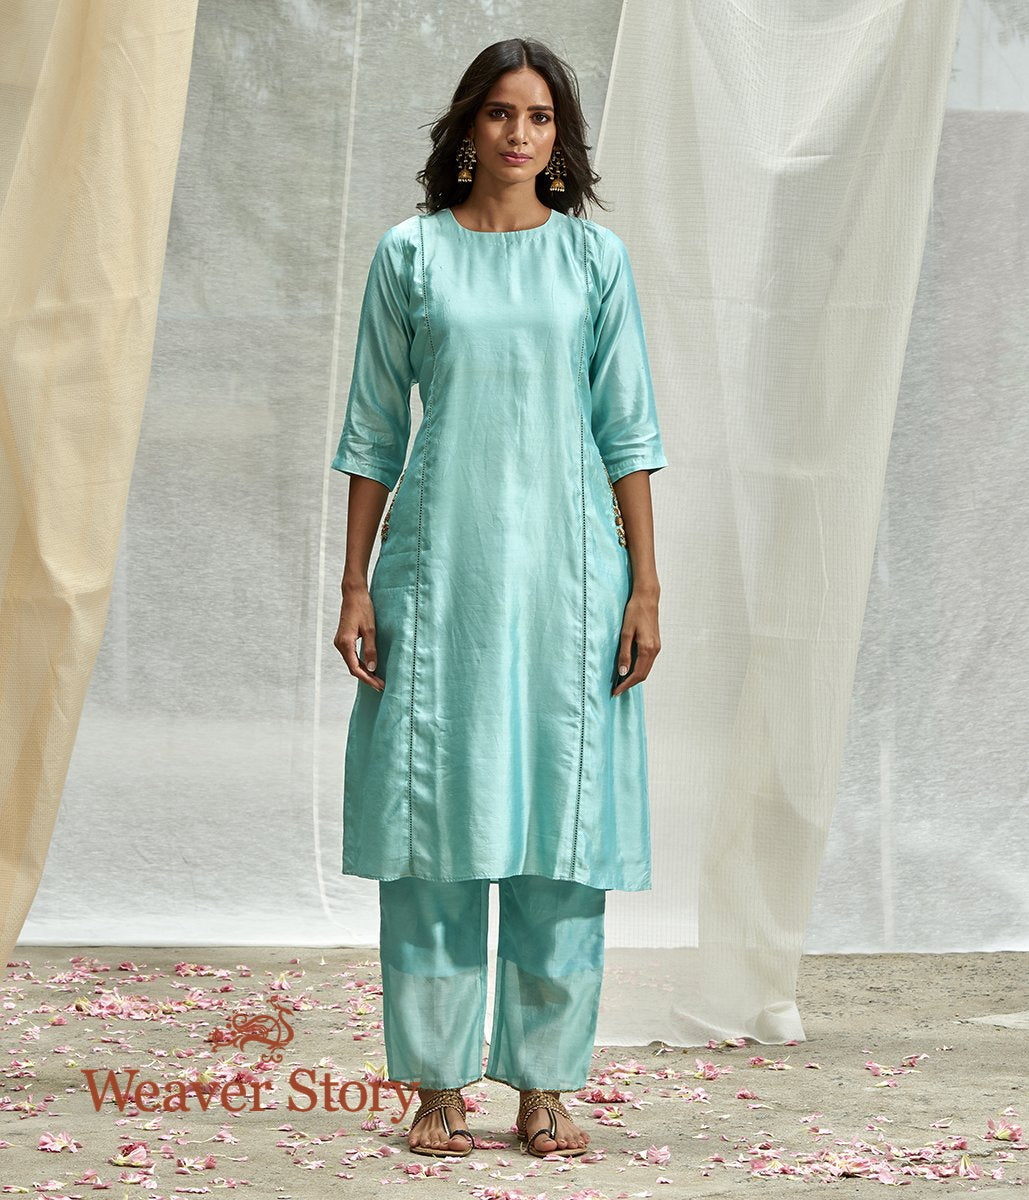 Handwoven_Aqua_Blue_Tunic_and_Pants_Set_with_Pocket_Embroidery_WeaverStory_03